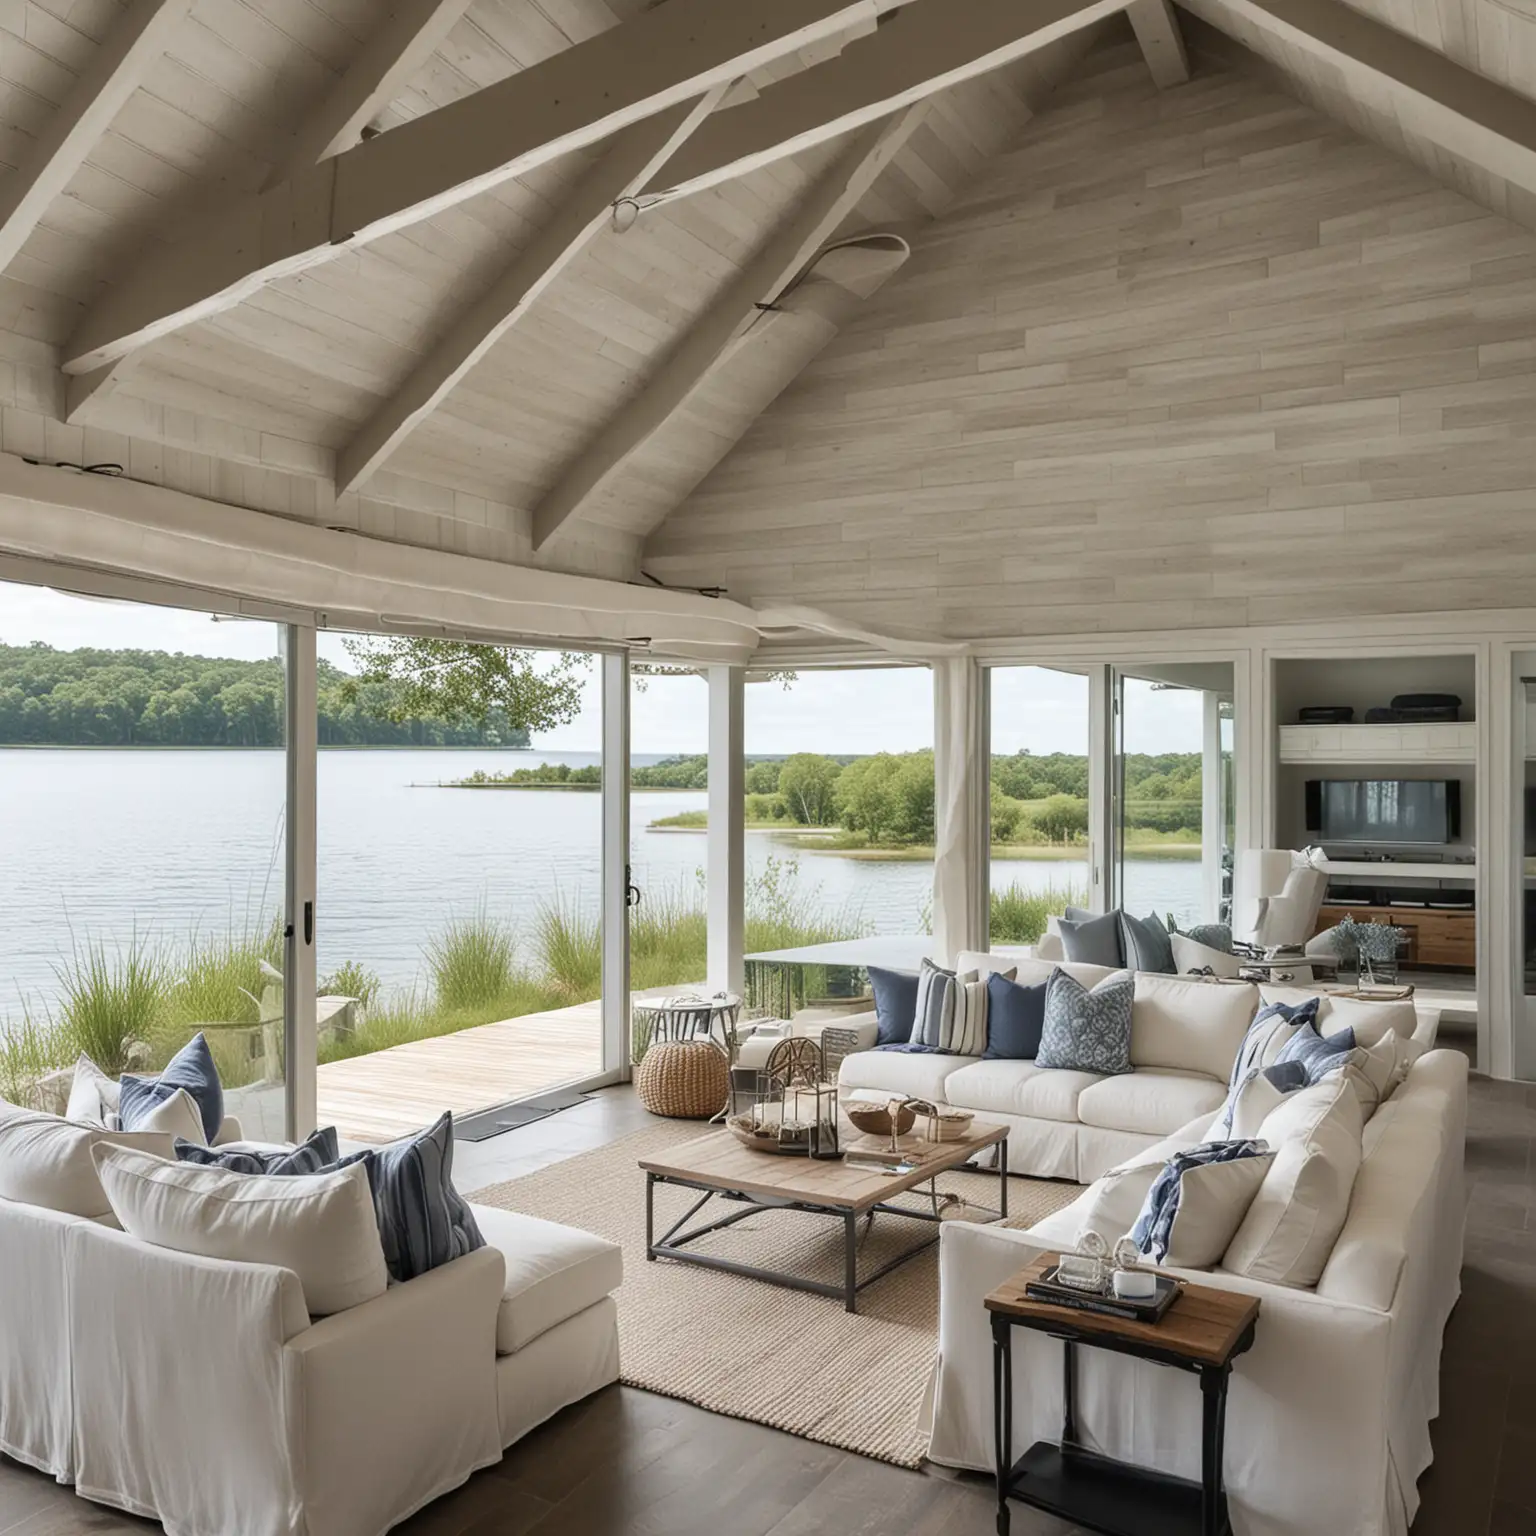 Modern Lakefront Boat House with Slipcovered Furniture and Coastal Decor